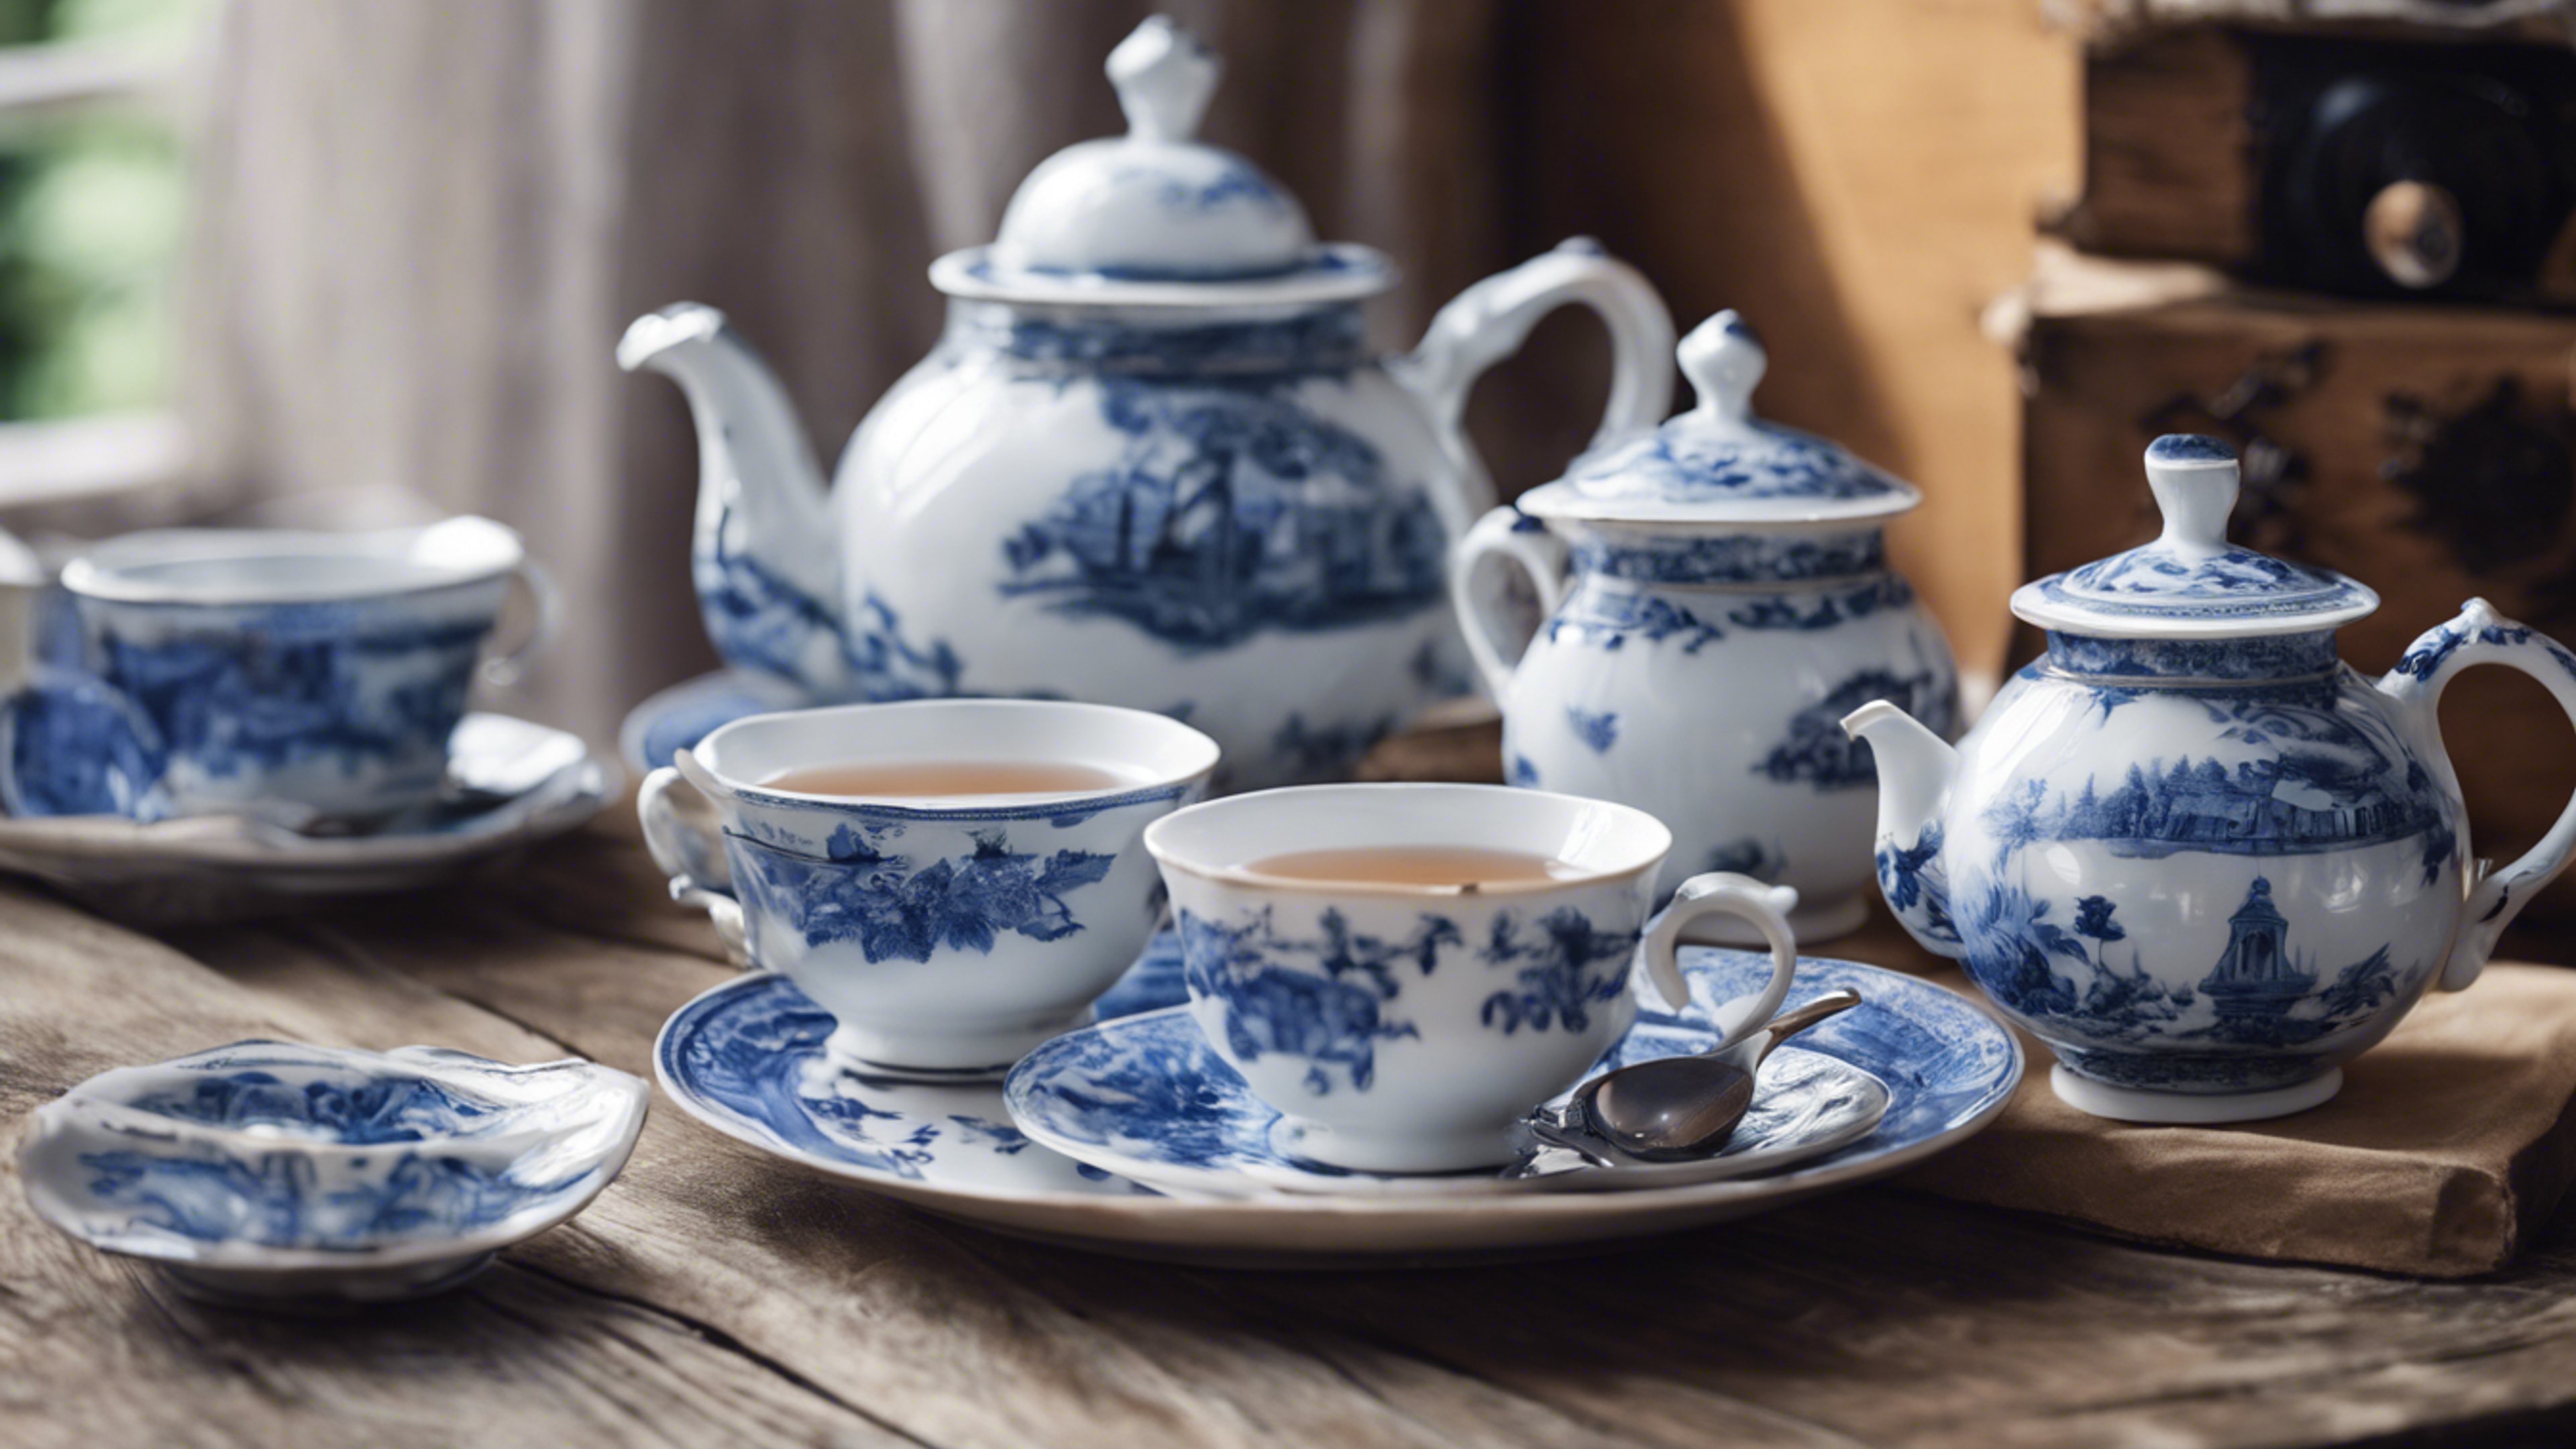 Vintage porcelain tea set in blue and white, placed on a rustic wooden table. 牆紙[4fbd951e4e494dd09da7]